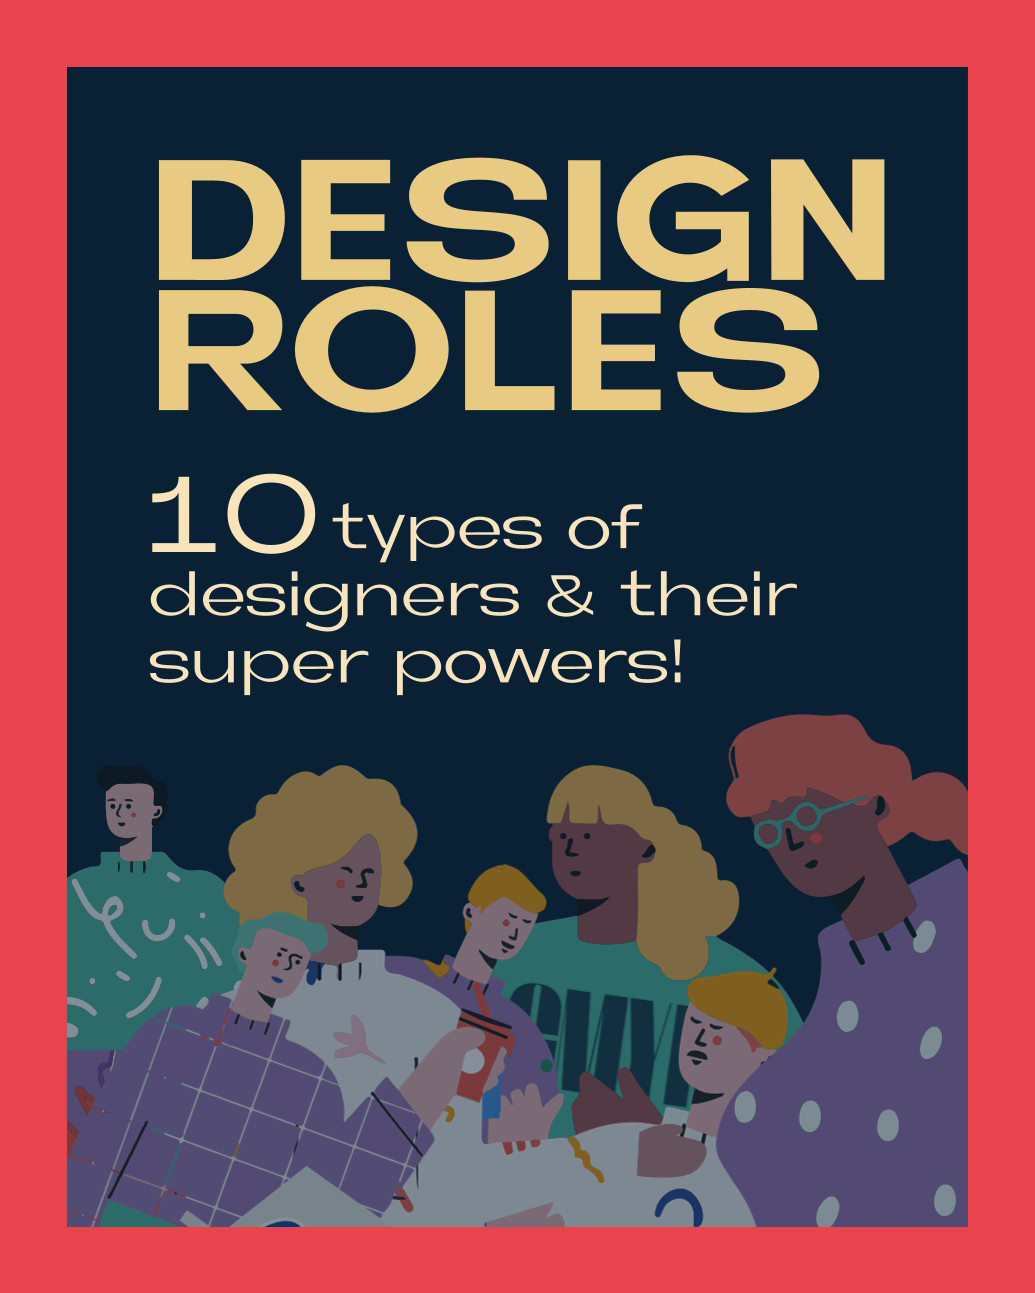 DESIGN ROLES: 10 types of designers & their super powers!